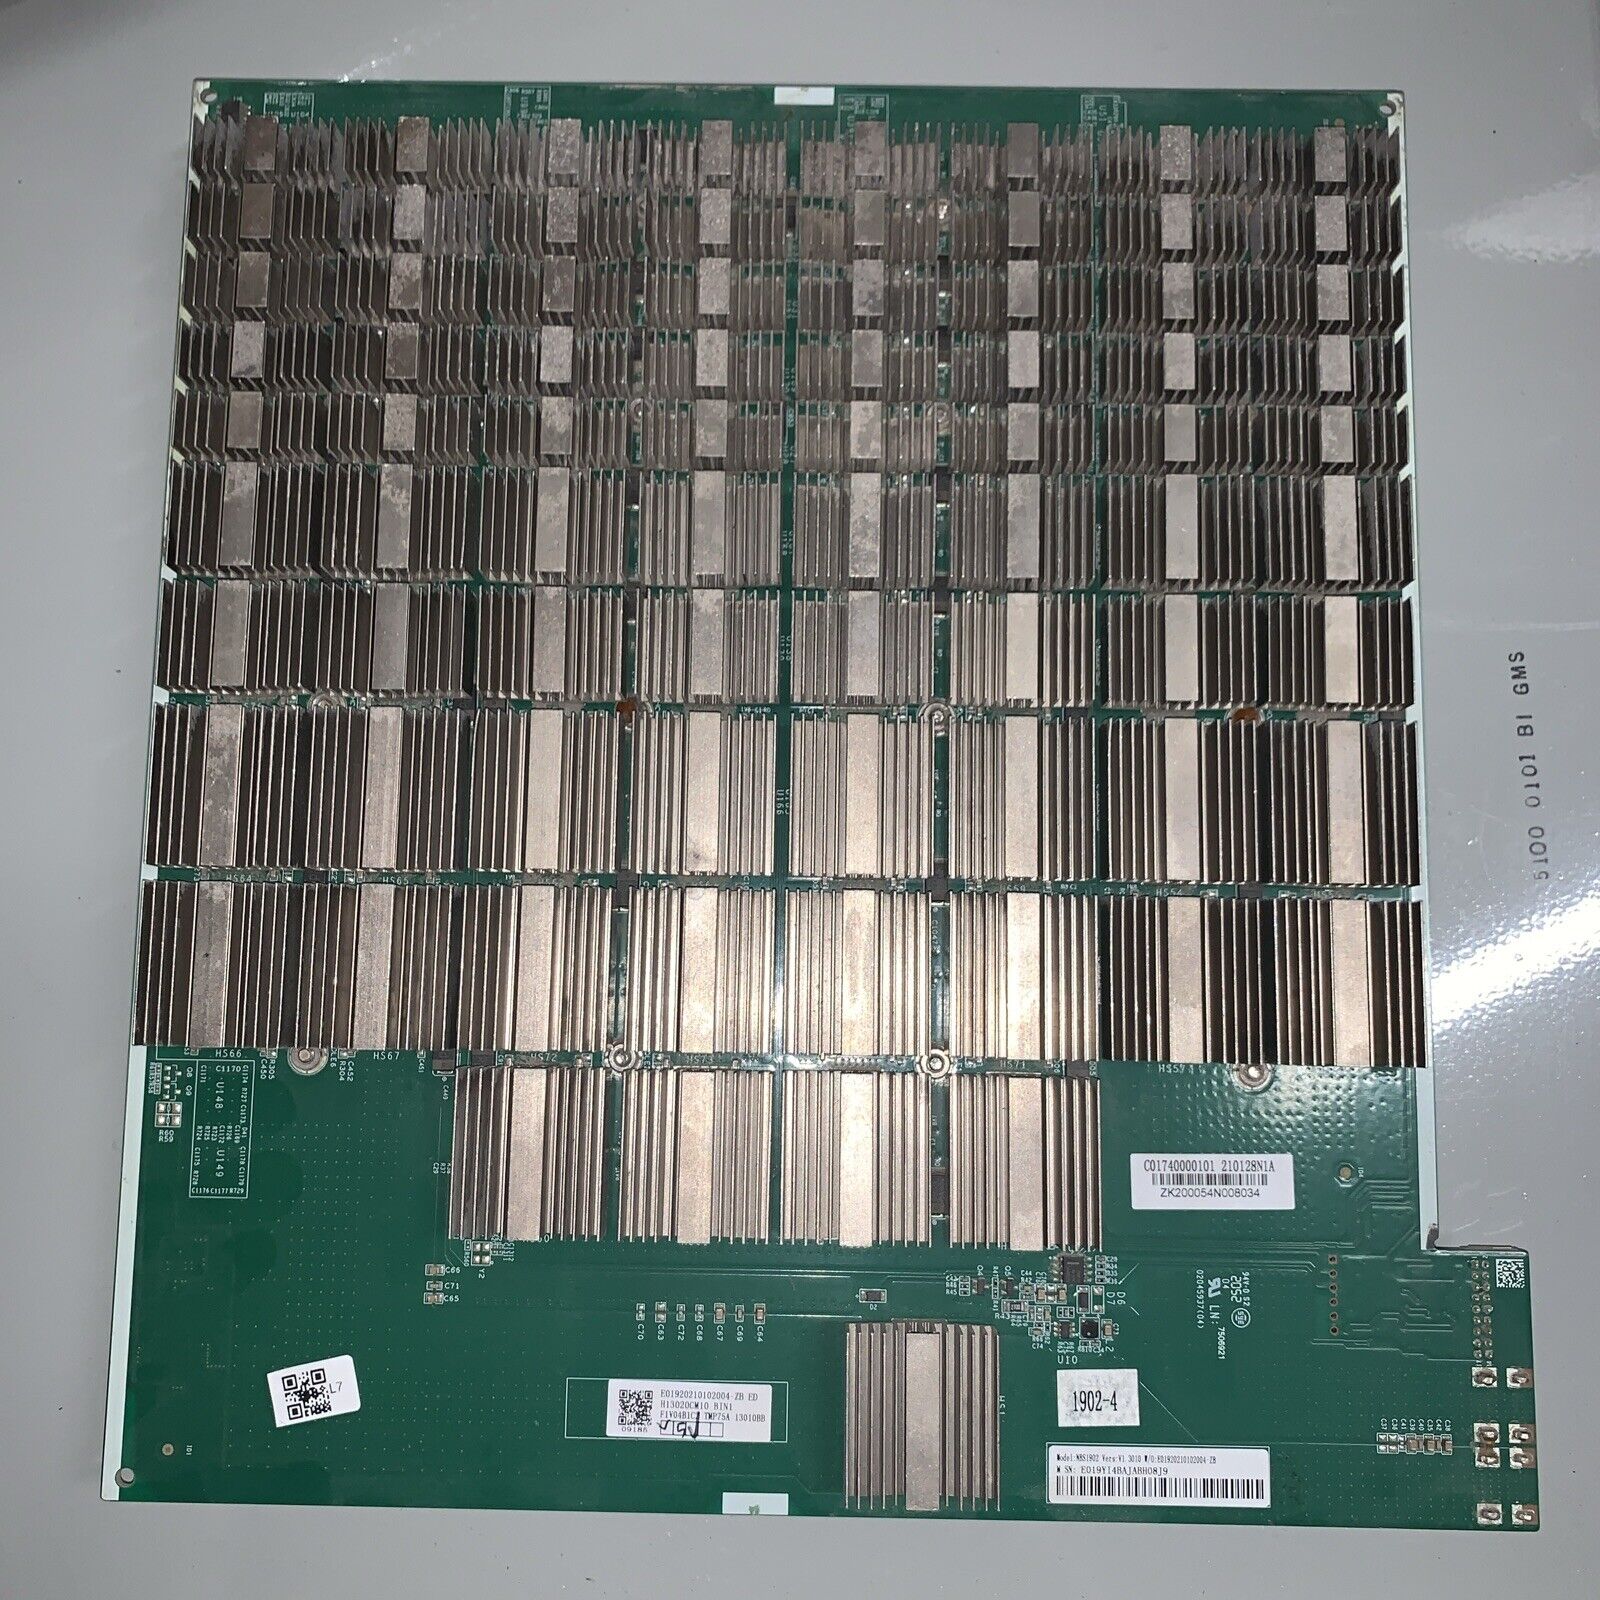 S19 Hash board for Bitmain Antminer S19 95TH BTC ASIC bitcoin miner (Qty)